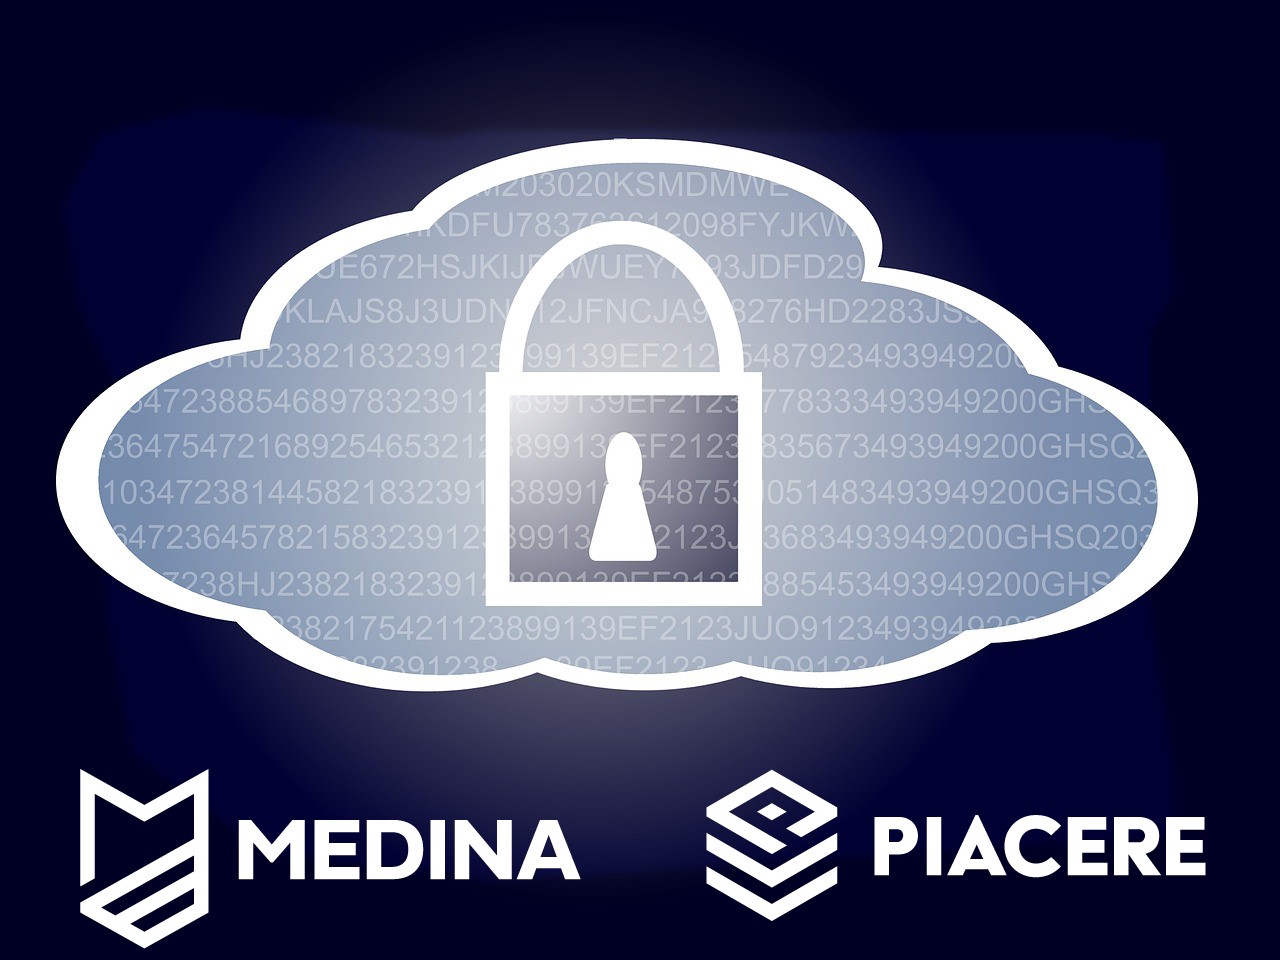 Enabling 360 Cloud security compliance: From Security certification to Secure DevOps through MEDINA and PIACERE H2020 projects